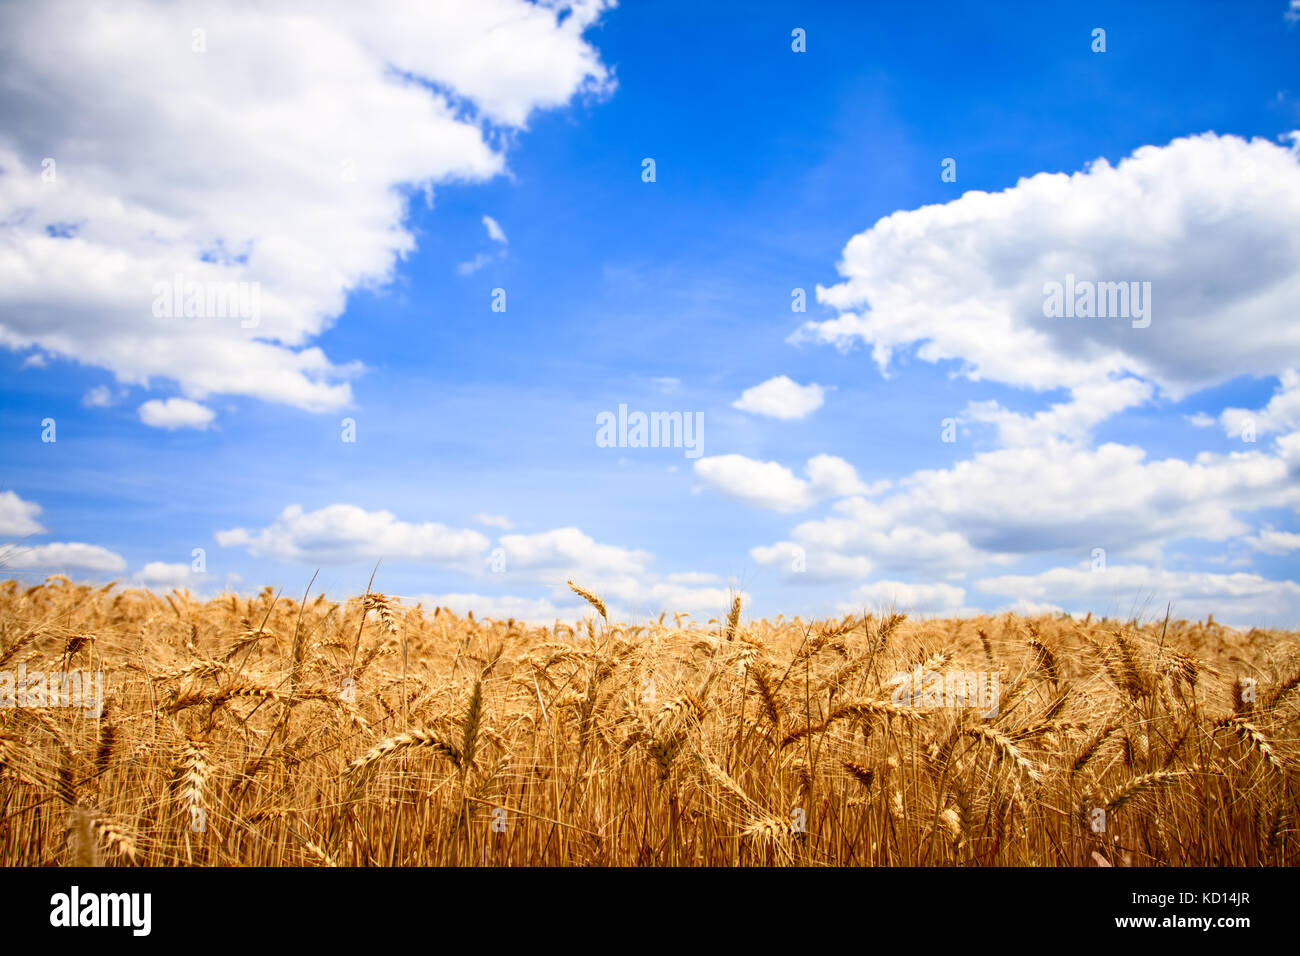 golden wheat field with blue sky, landscape Stock Photo